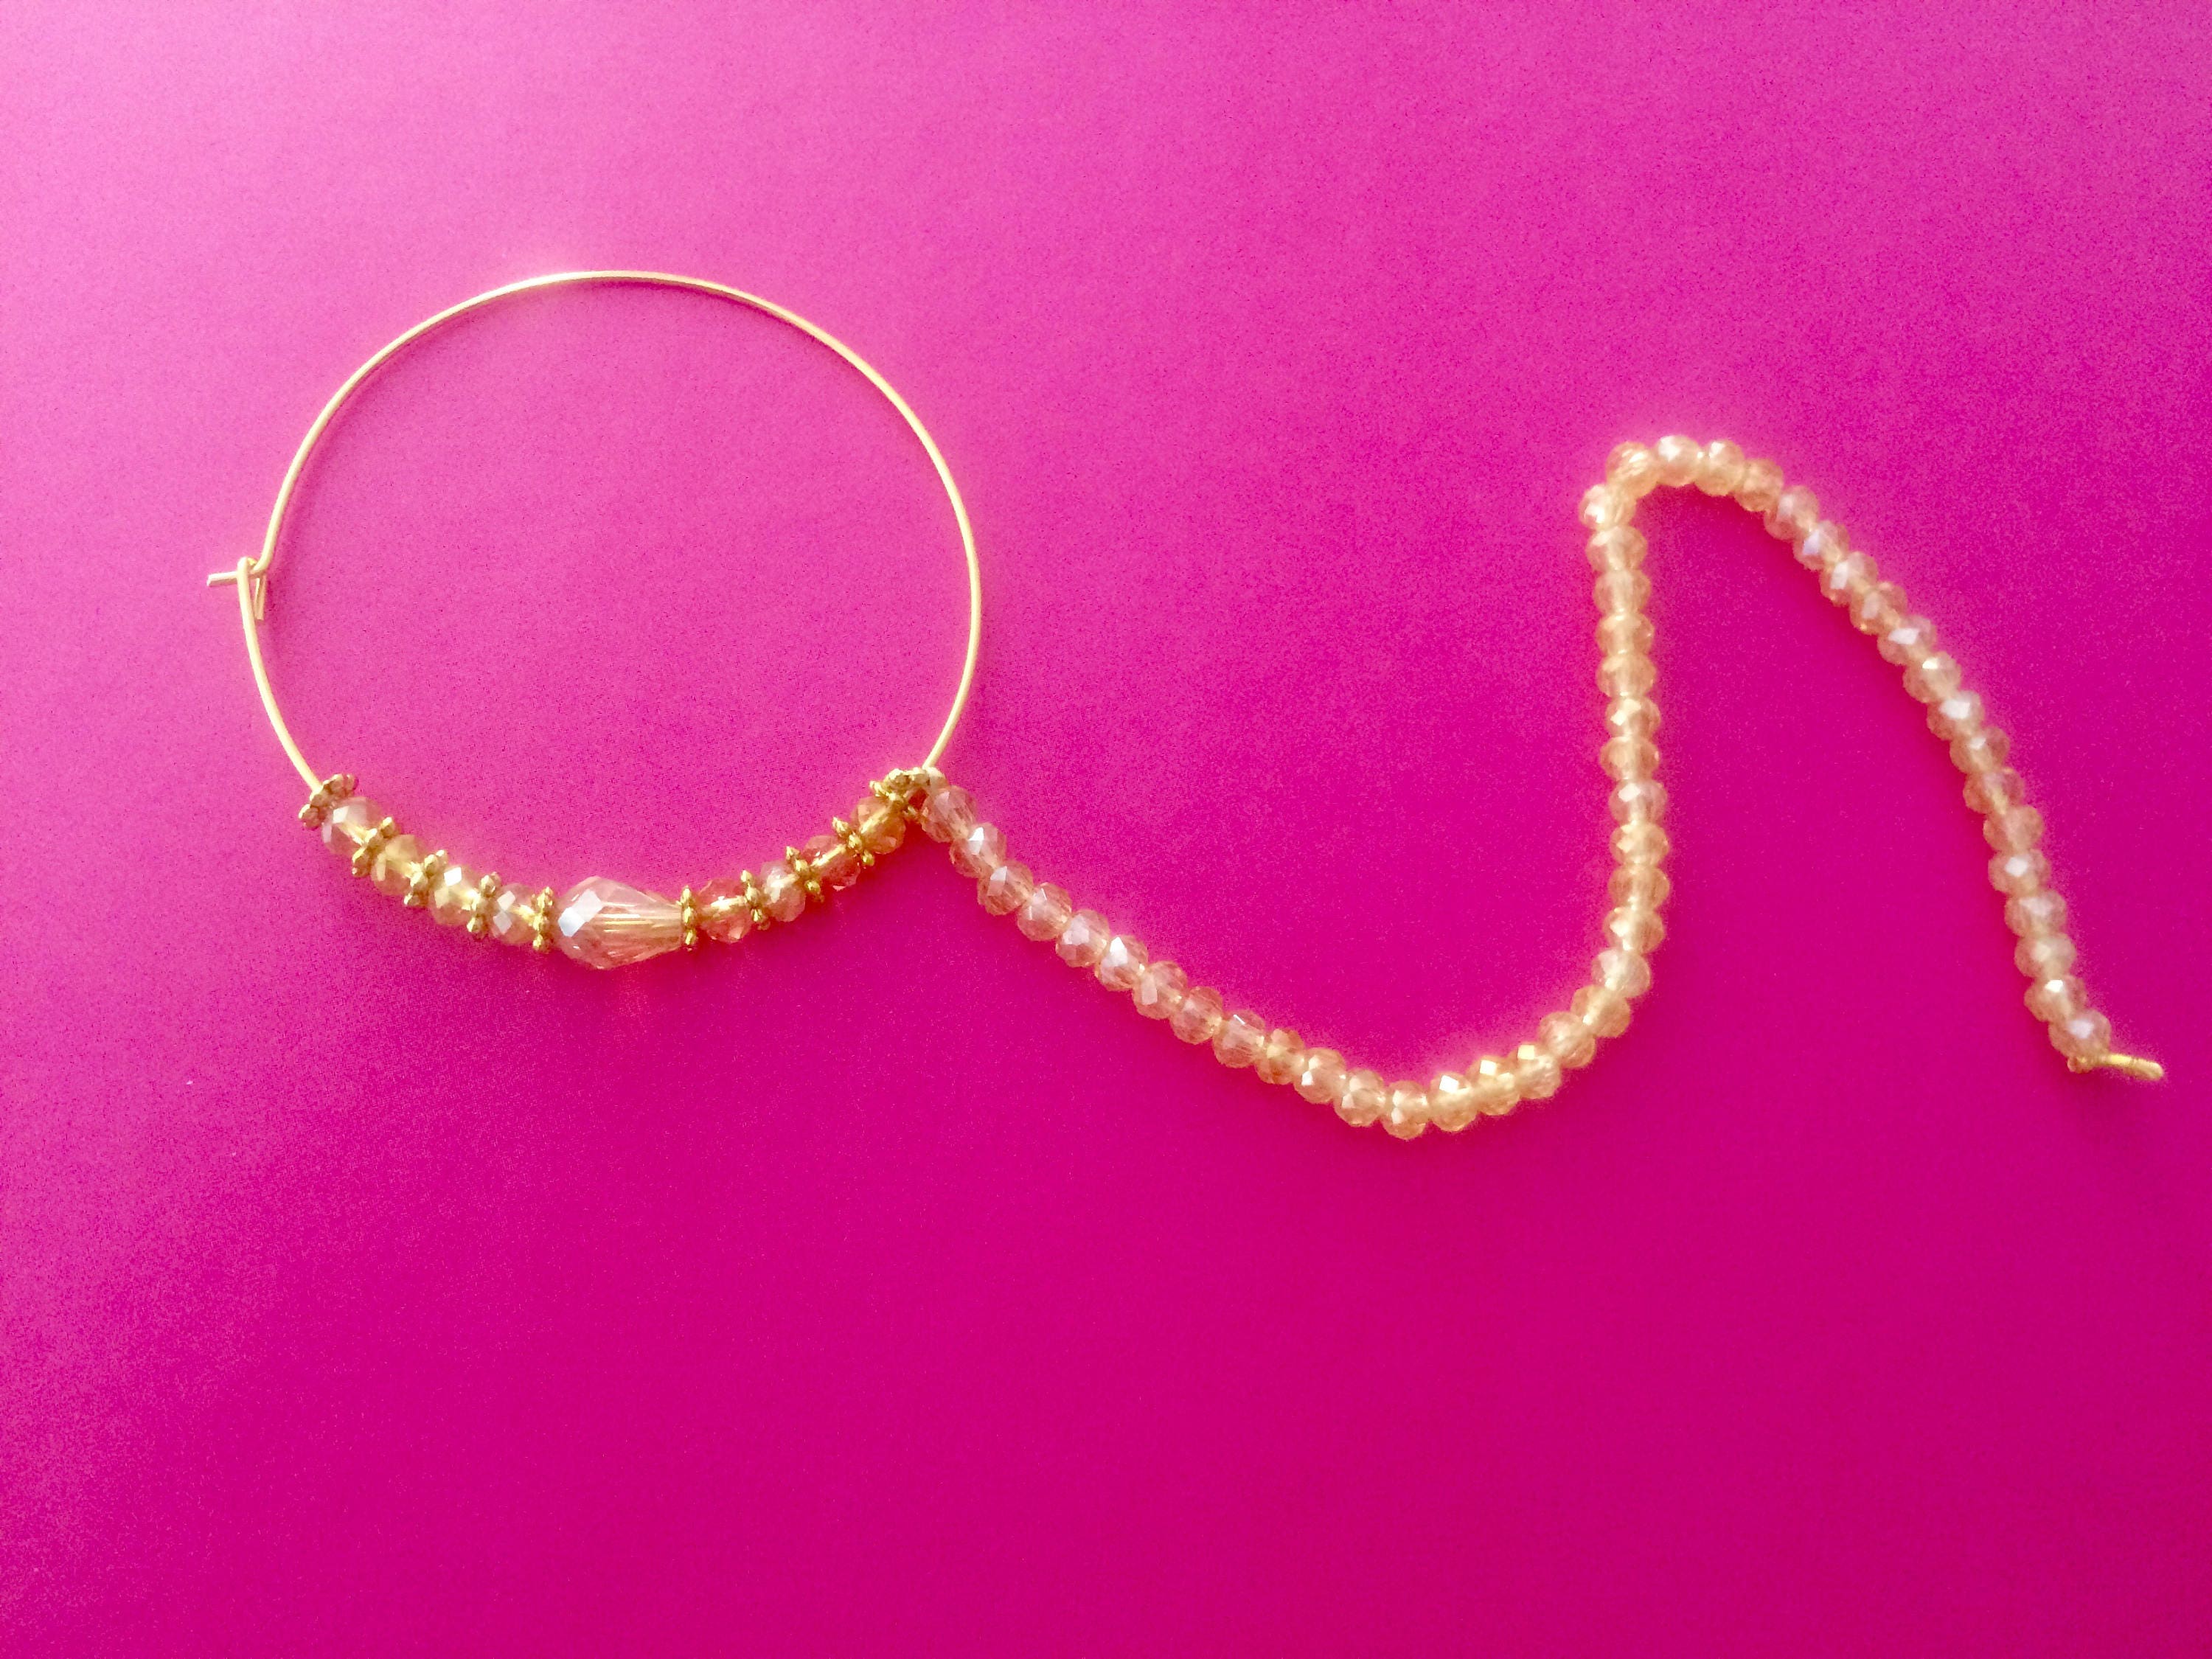 Pink Bead Indian Bridal Nose Ring Chain Gold Plated Hoop Nath Piercing  Jewelry | eBay